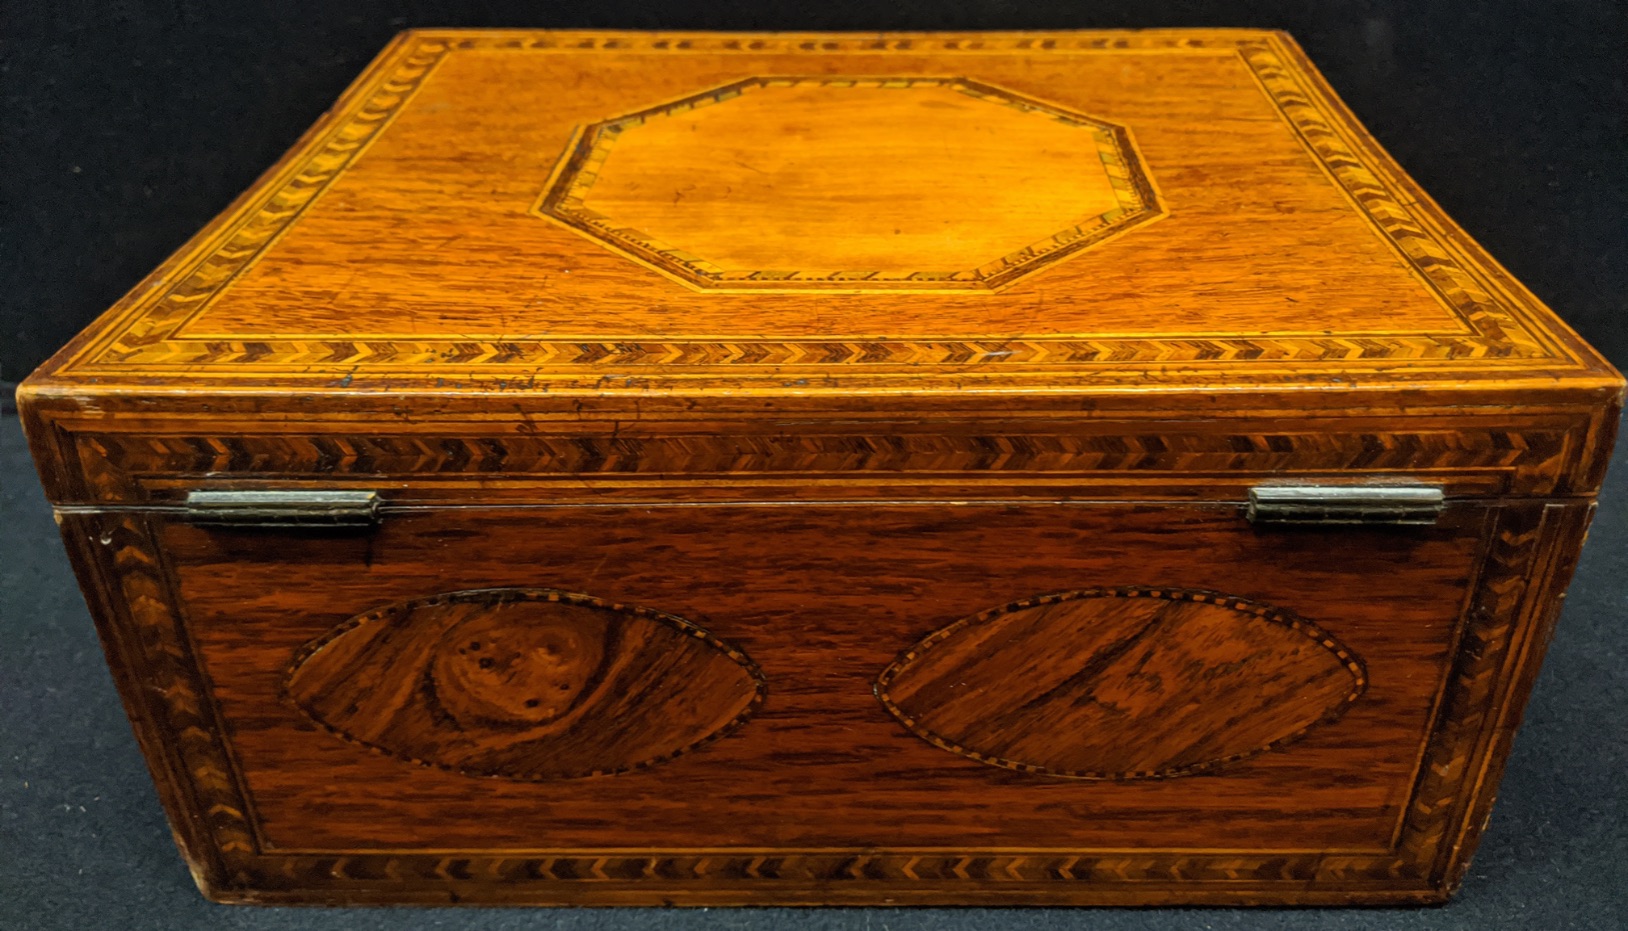 A 19th century walnut parquetry inlaid box, lower drawer, H.13cm L.27cm D.21cm - Image 3 of 3